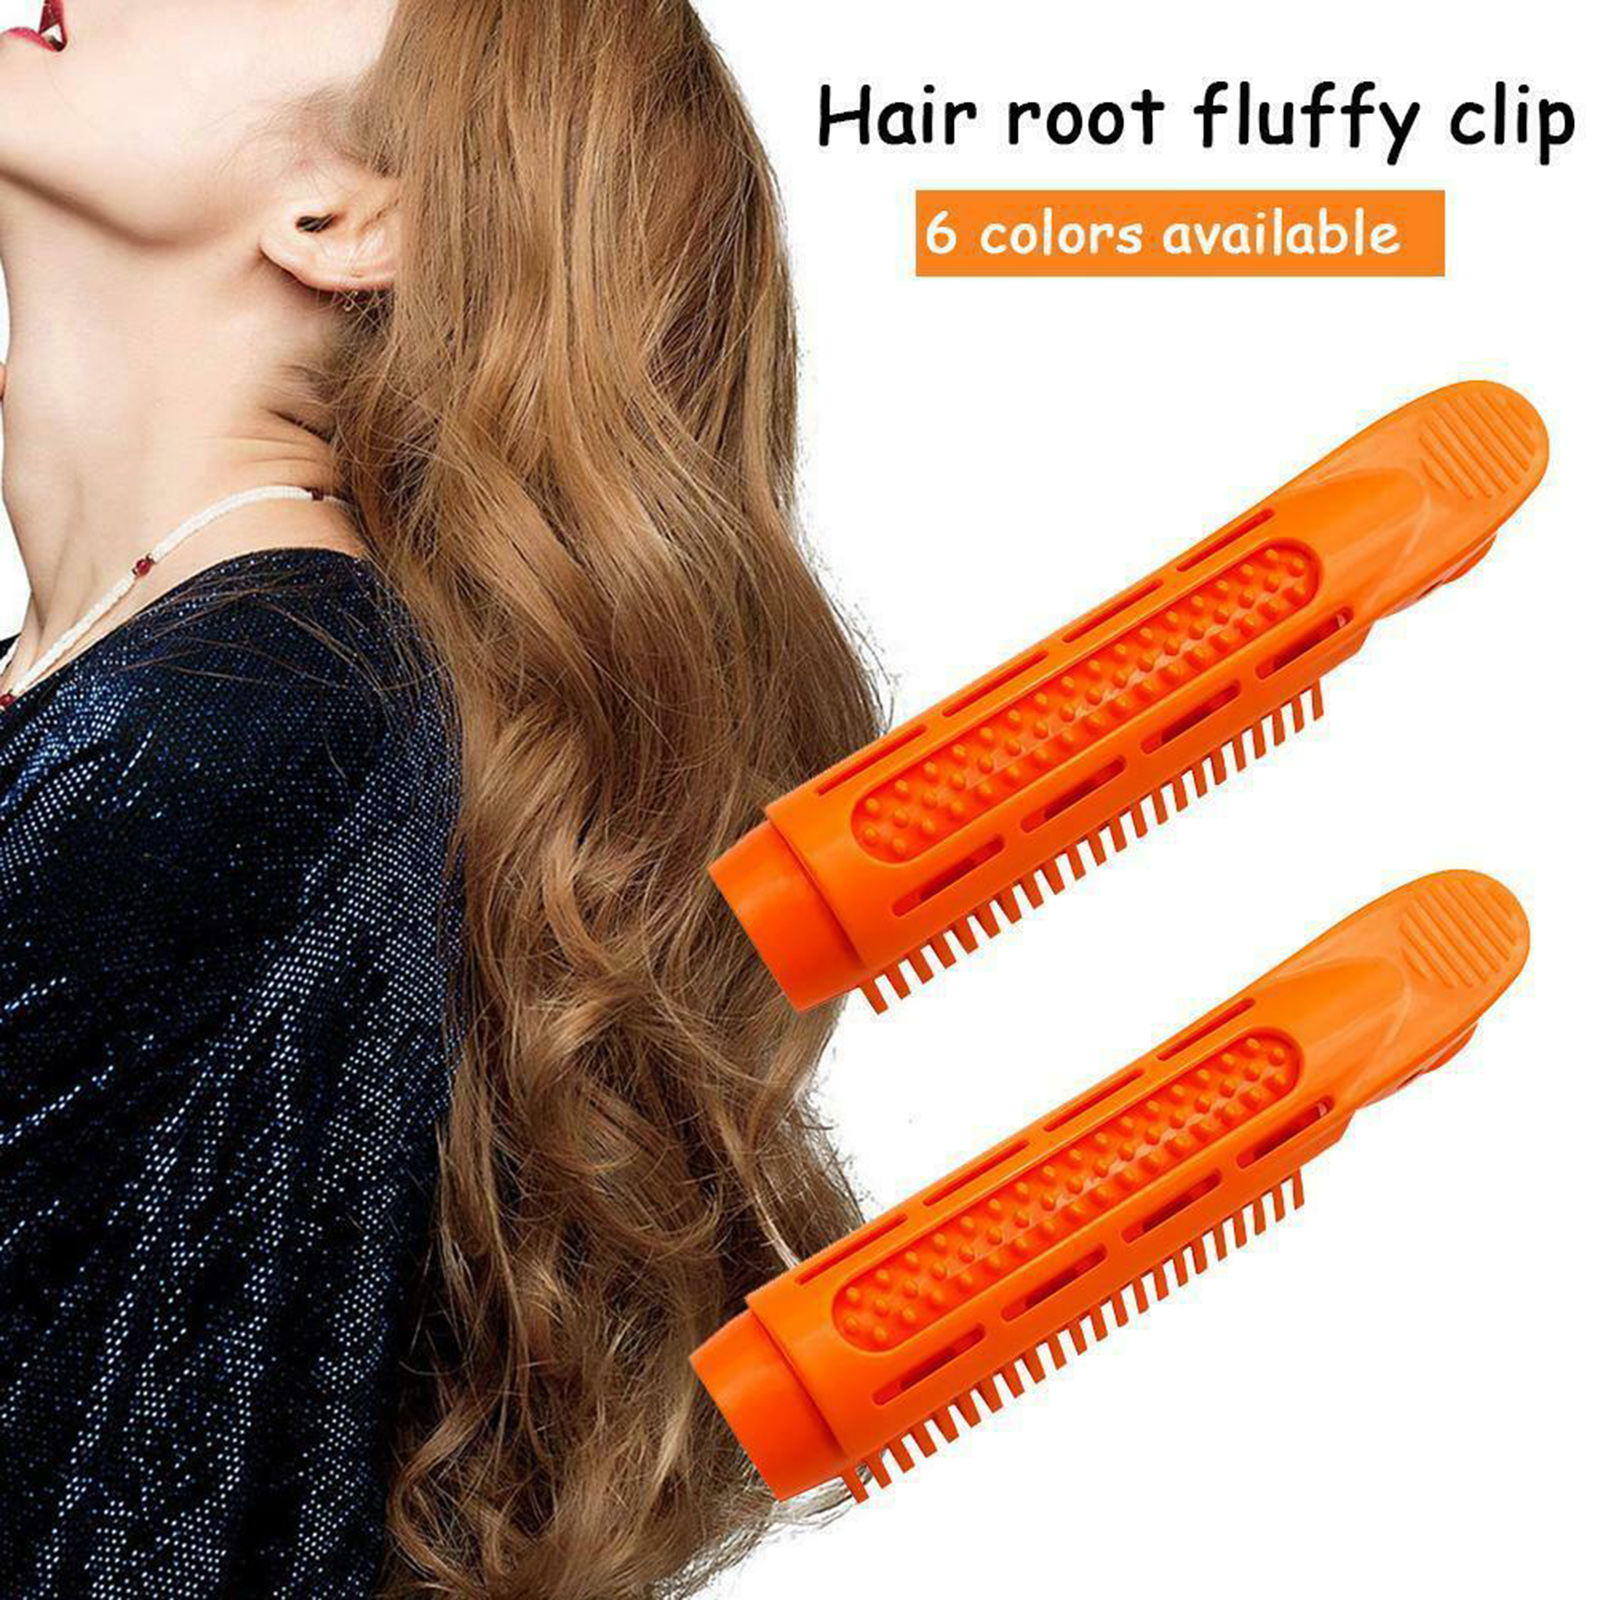 Aibecy 6 Pcs Styling Curling Clip Self Grip Root Volume Fluffy Hair Curler Clip Perm for Hair Styling - image 3 of 7